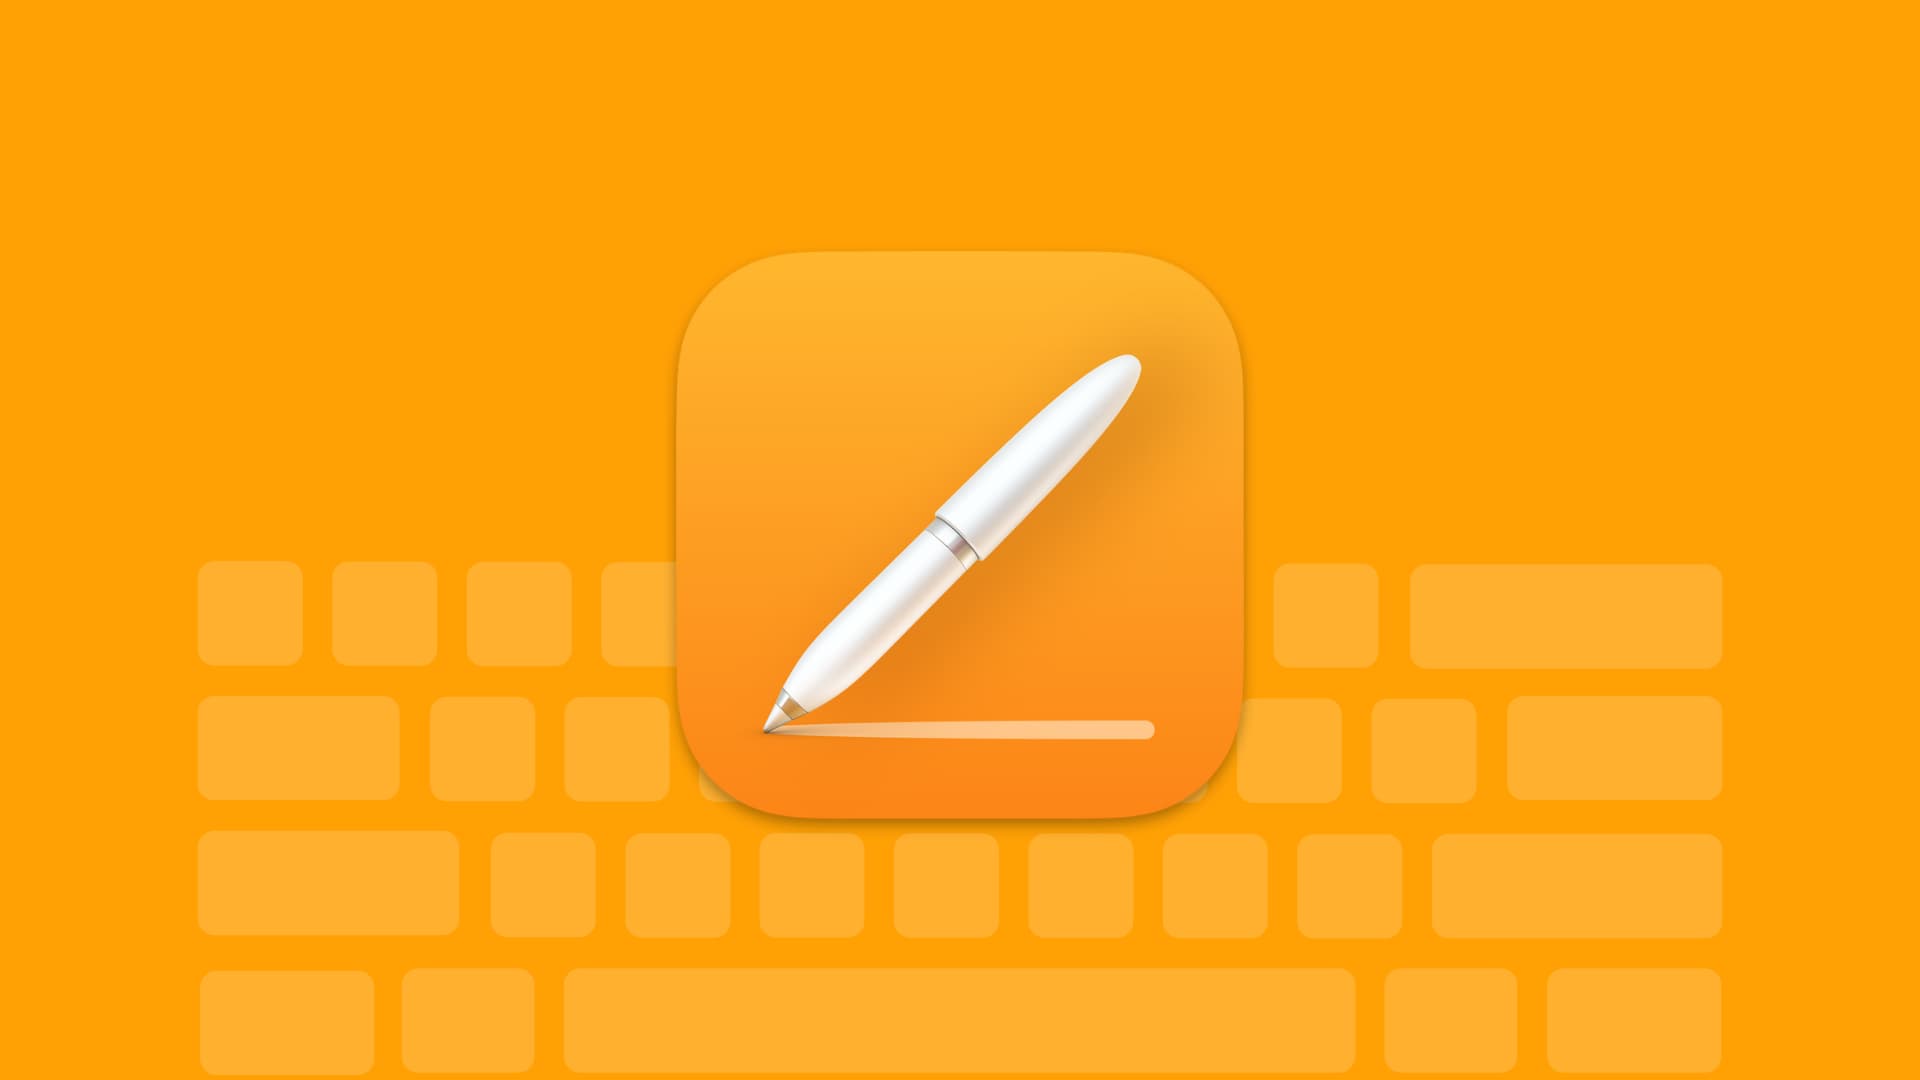 Pages app keyboard shortcuts for Mac